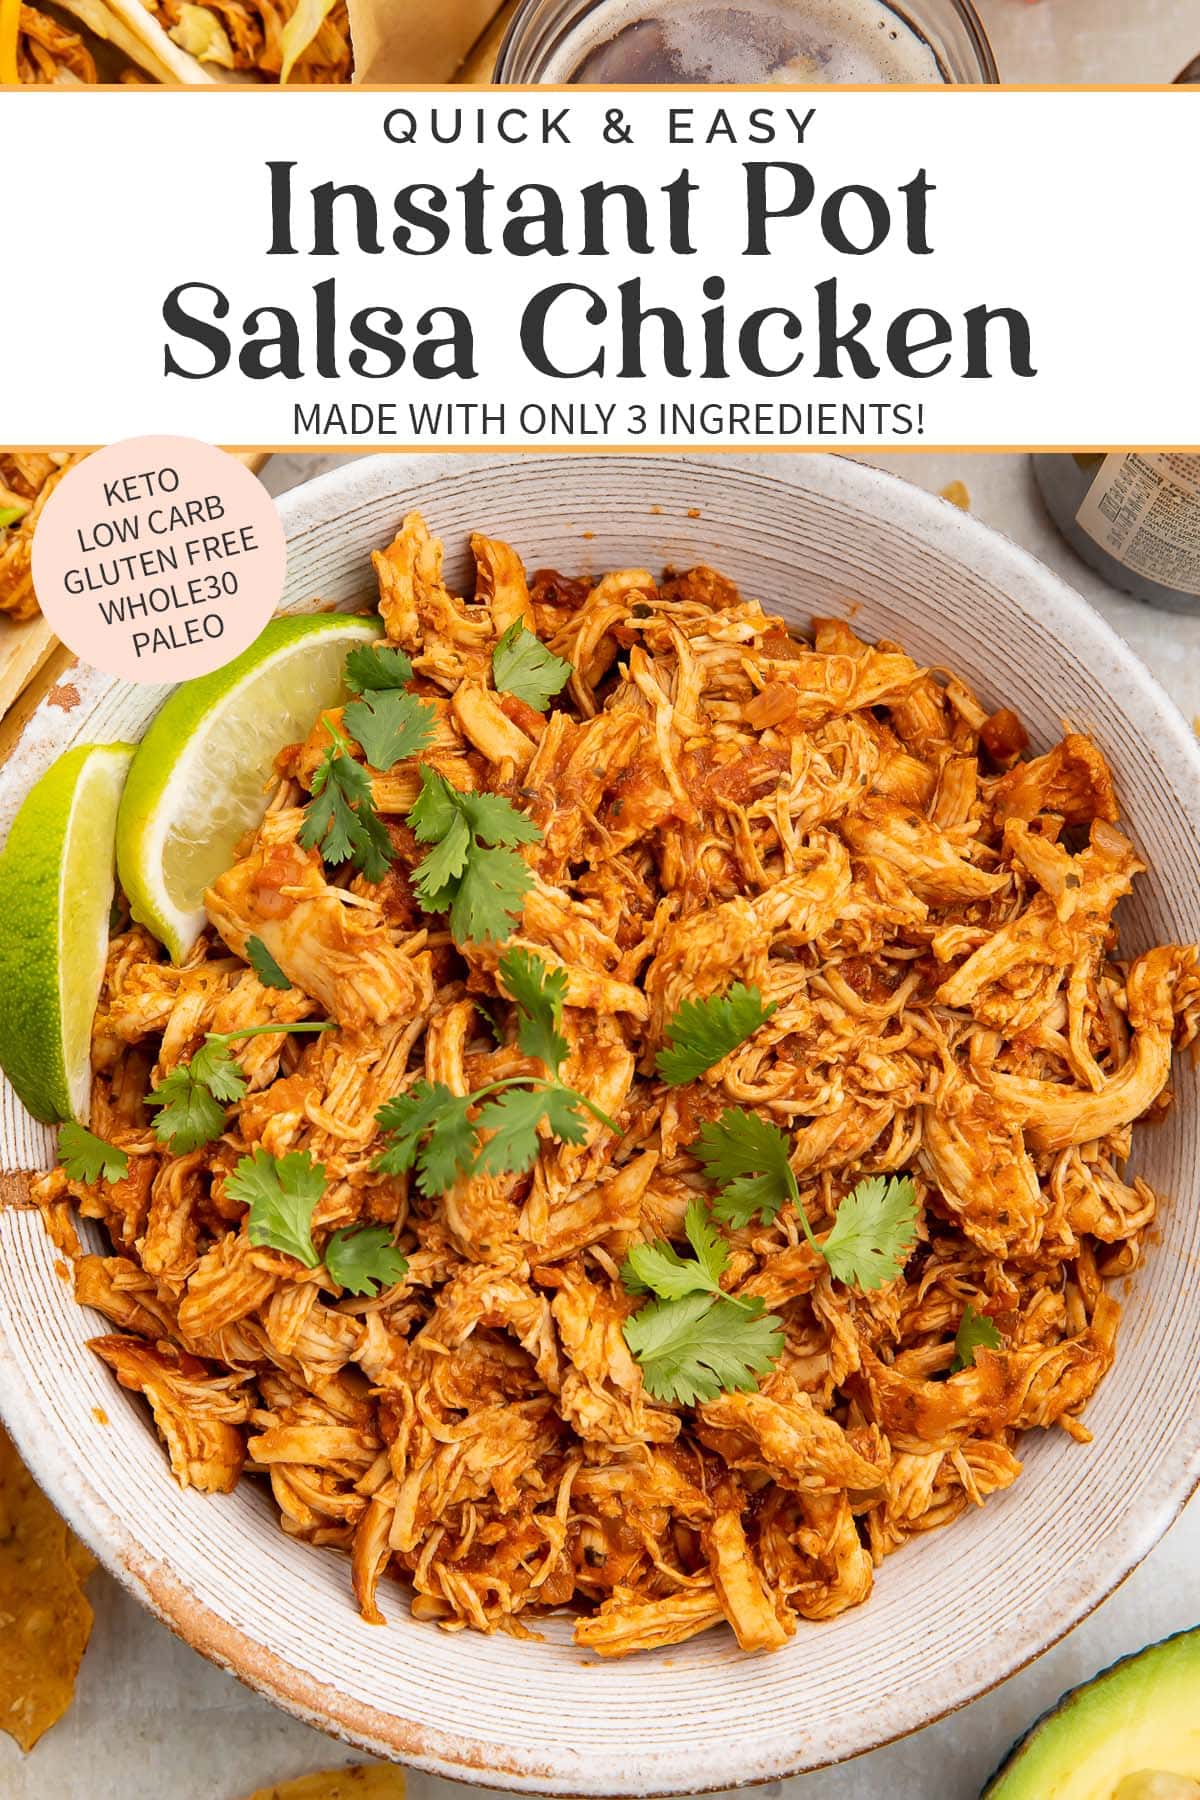 Pin graphic for Instant Pot salsa chicken.